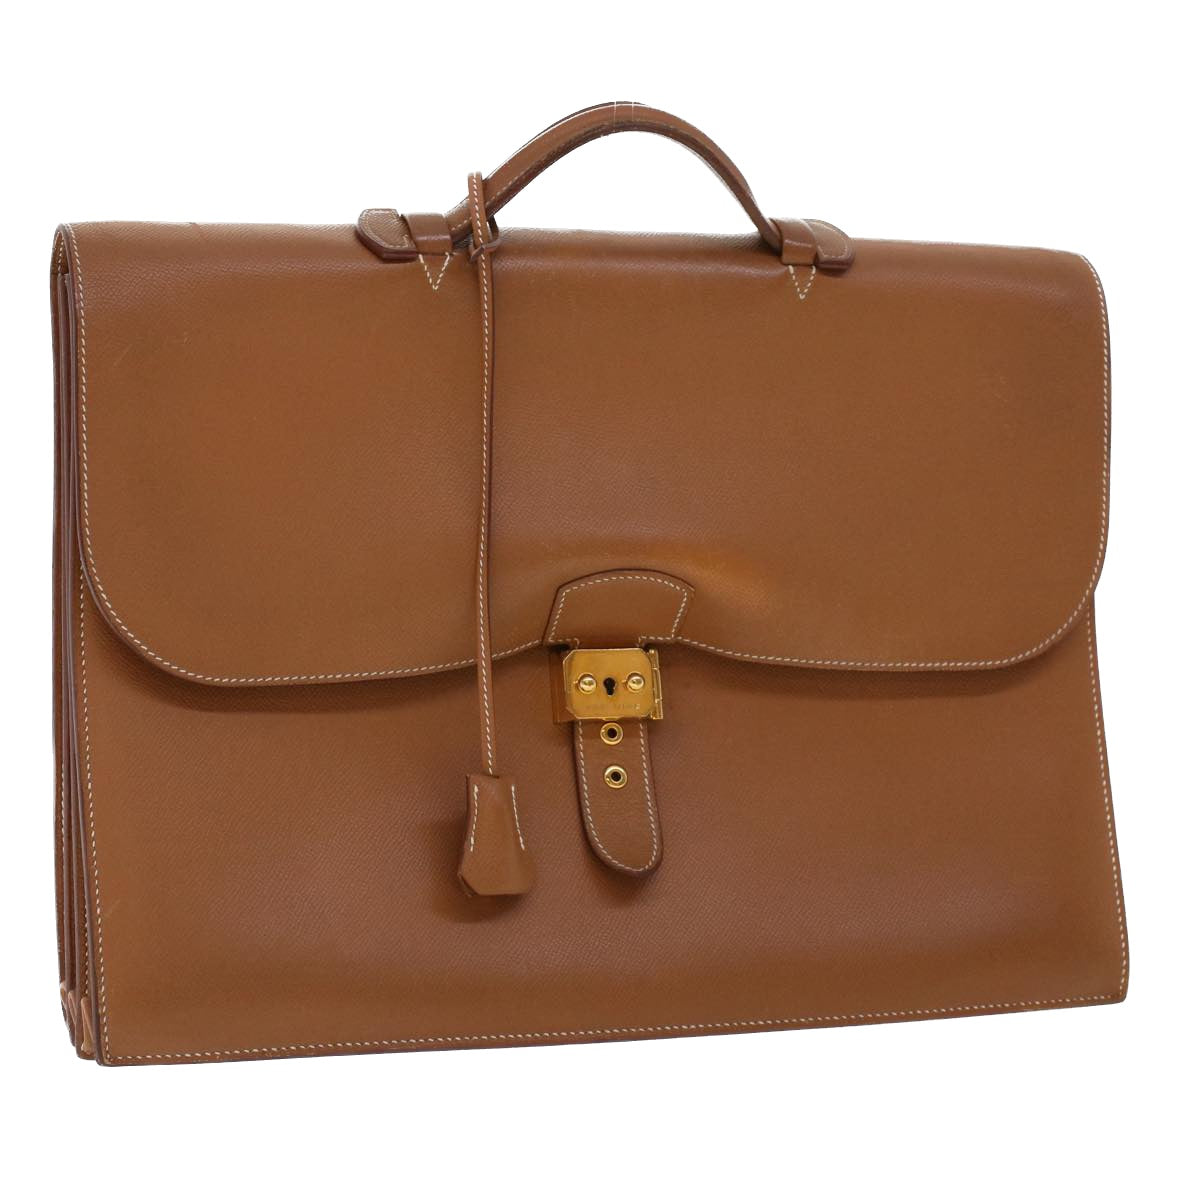 HERMES Sac Adepeche Business Bag Leather Brown Auth am4465